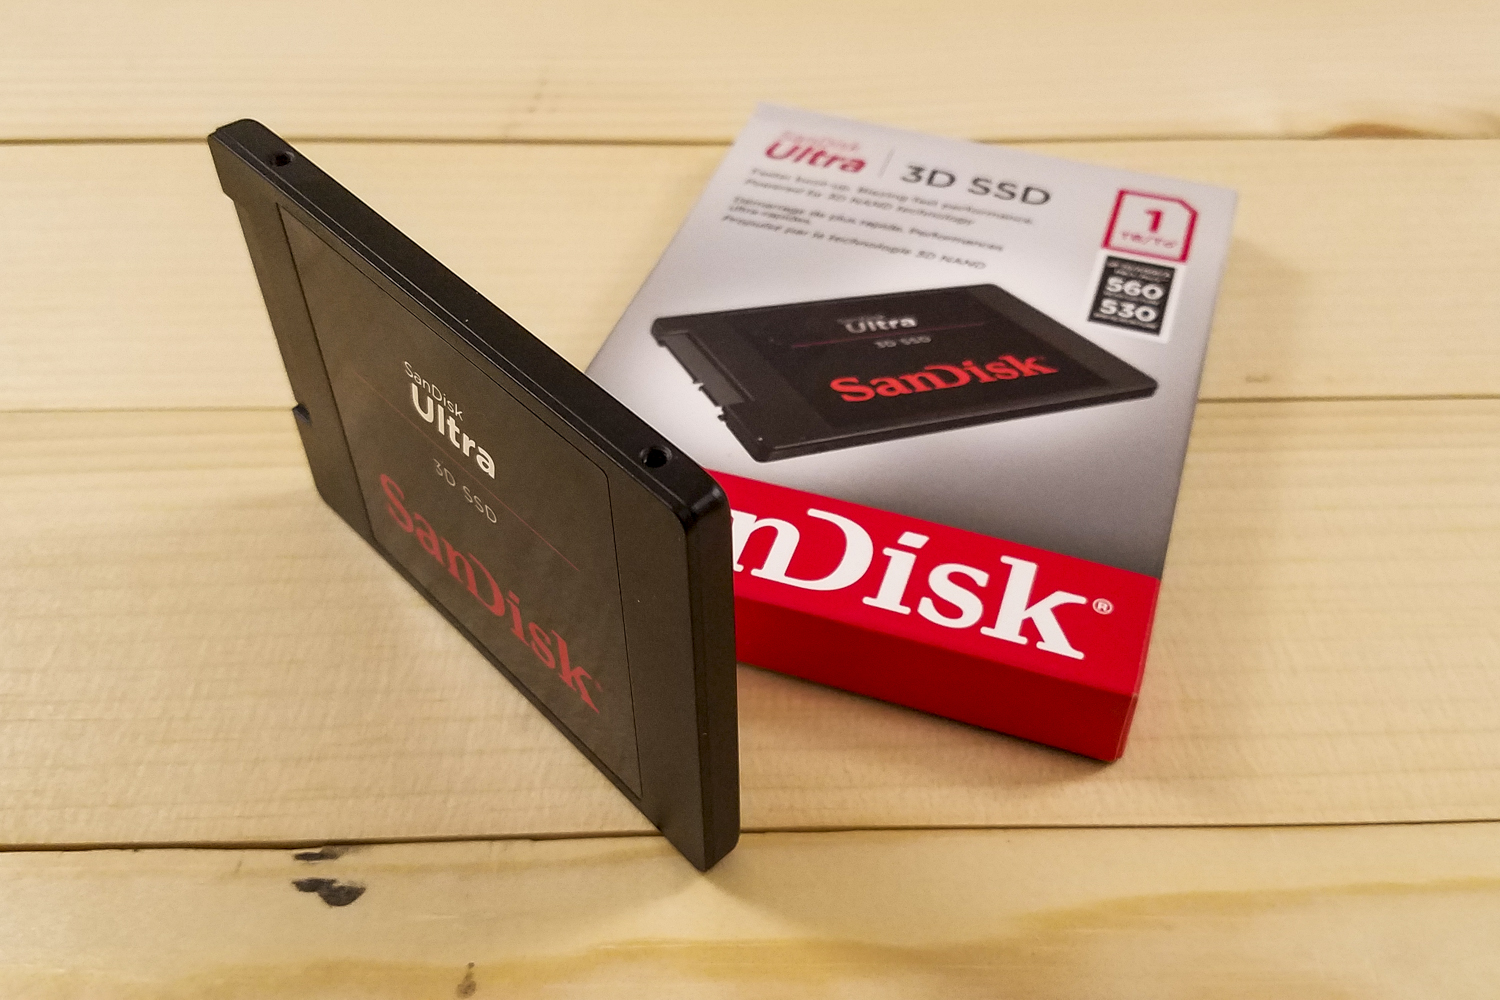 SanDisk Ultra 3D SSD sitting next to the box it comes in